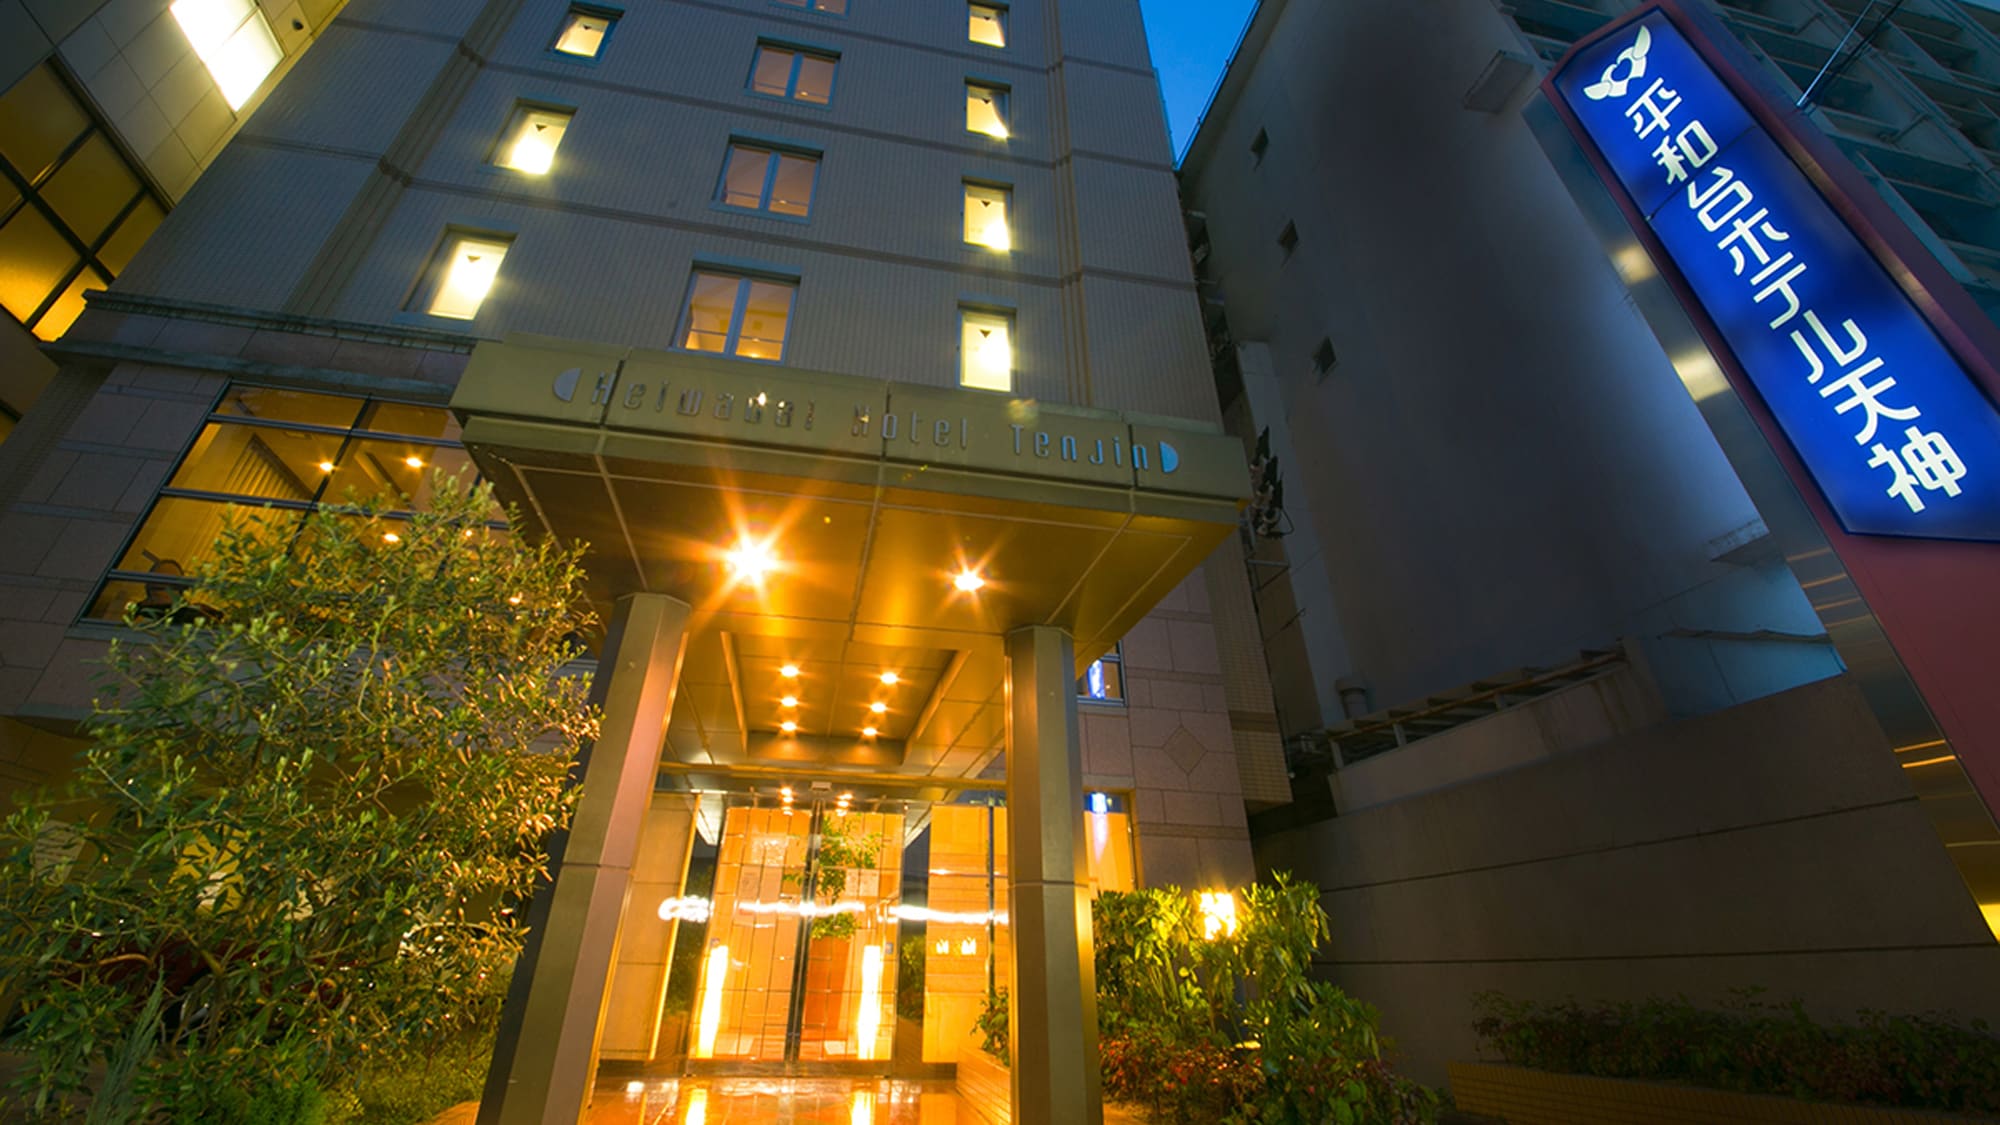 [Heiwadai Hotel Tenjin] Convenient for shopping and business, Heiwadai Hotel Tenjin is an 8-minute walk from Tenjin Subway Station!